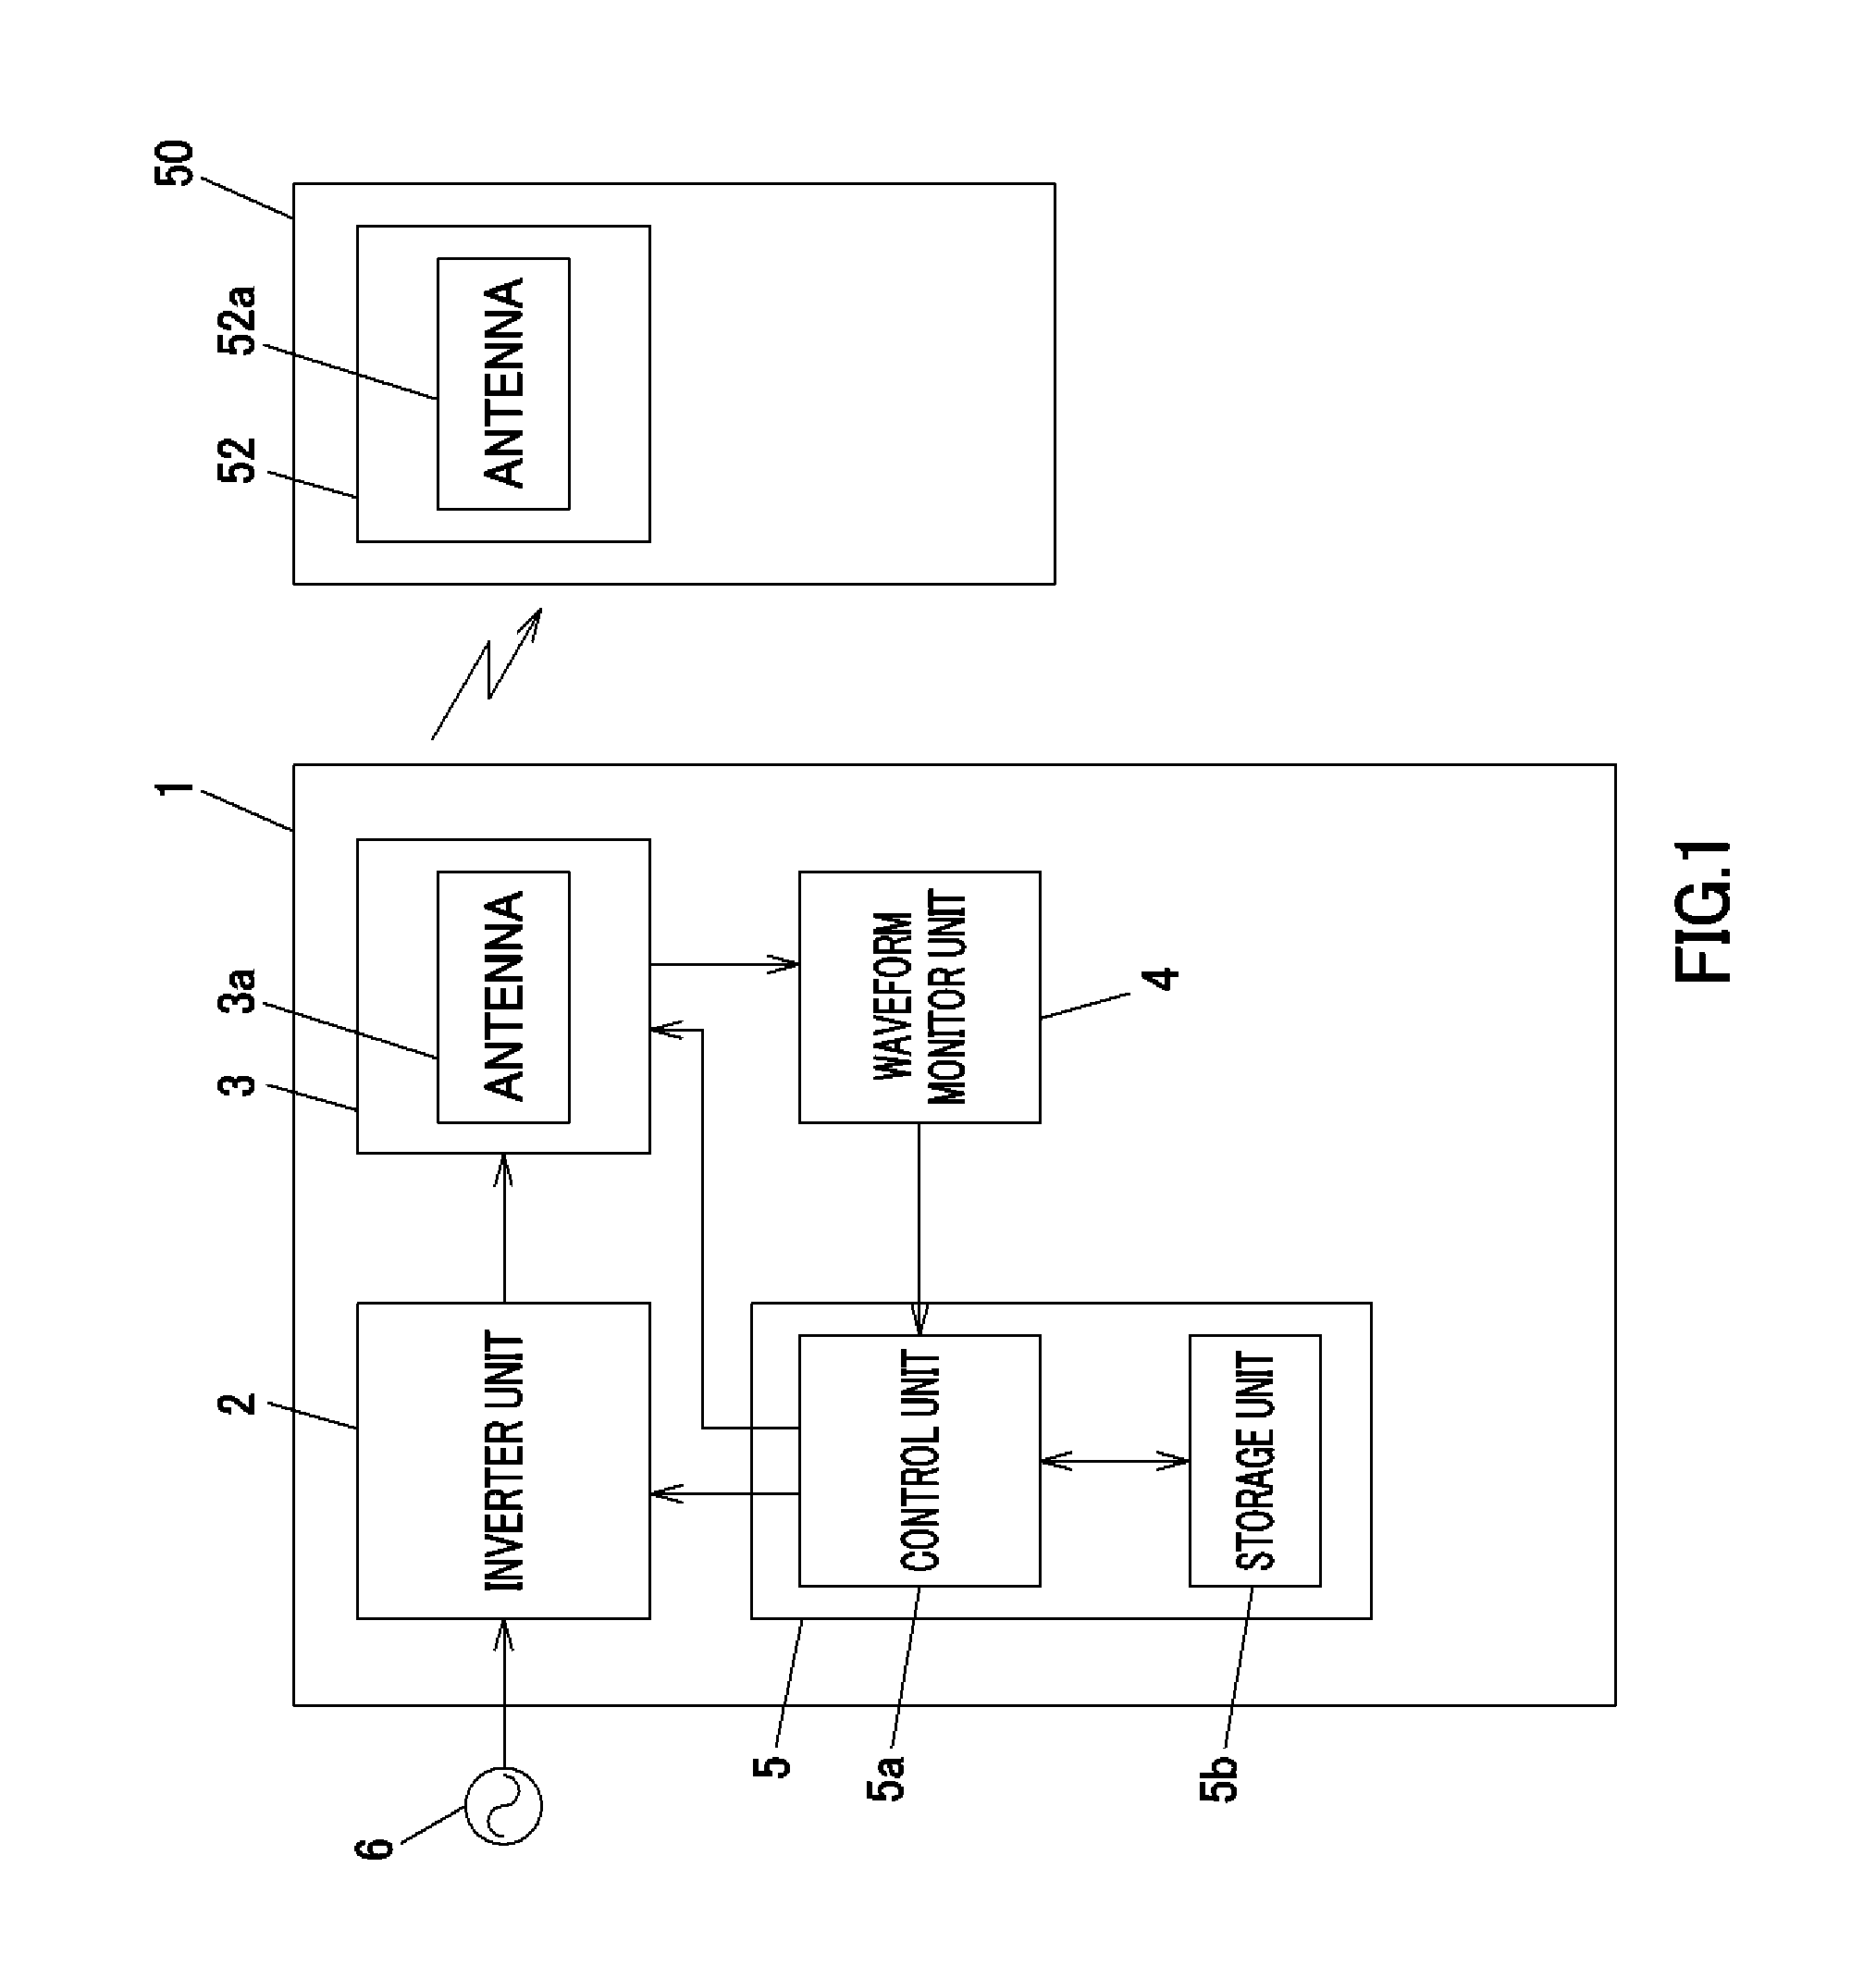 Power transmission device, power transmission and receiving device, method for detecting power receiving device, power receiving device detection program, and semiconductor device